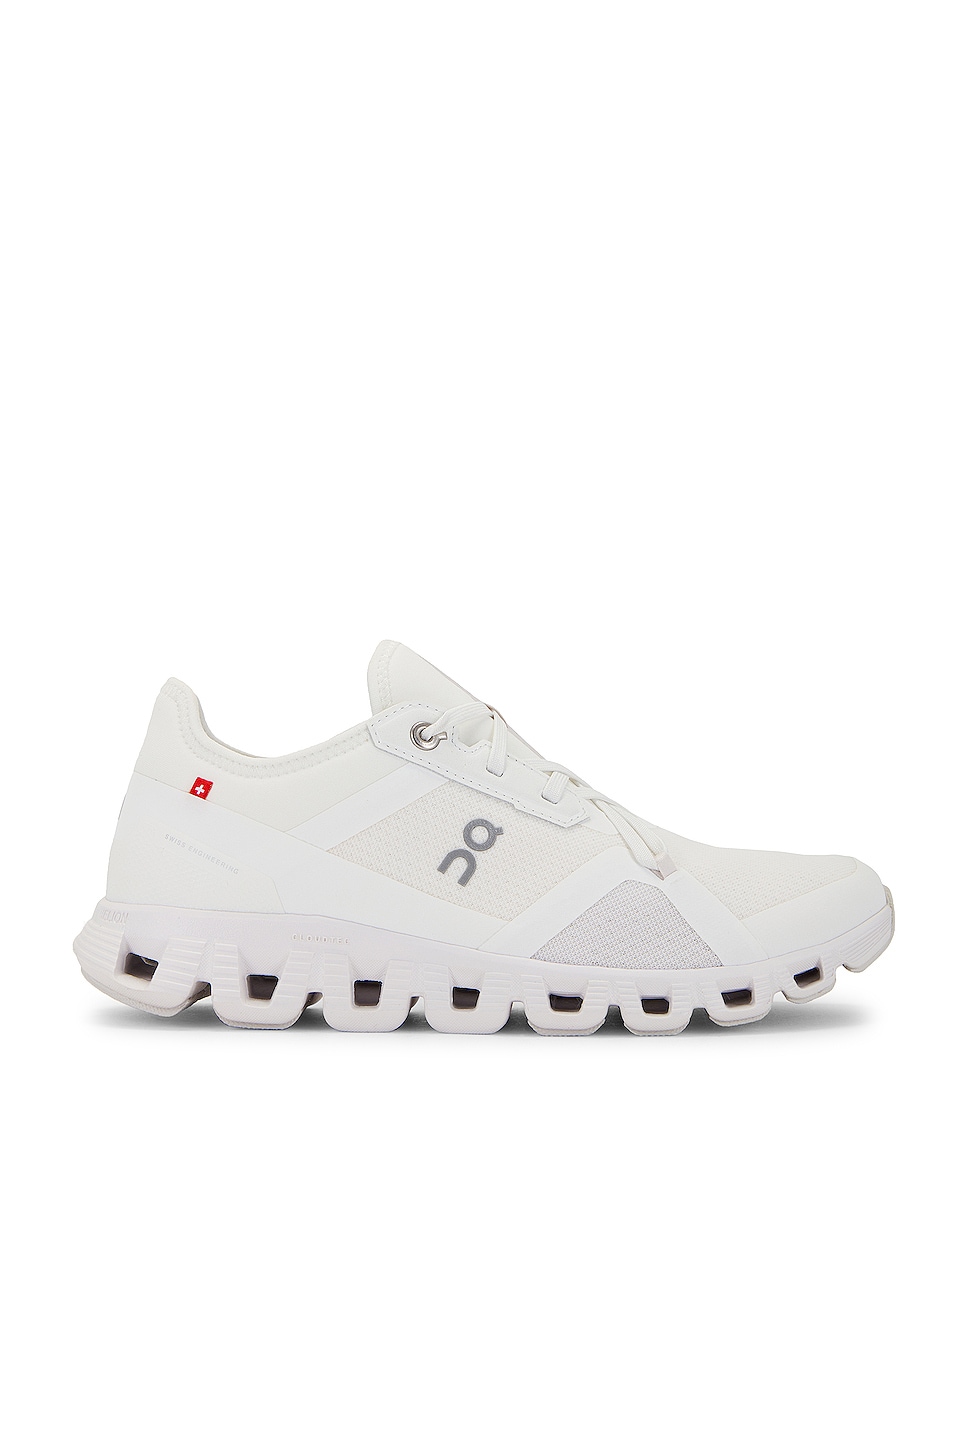 Image 1 of On Cloud X 3 Ad Sneaker in Undyed White & White